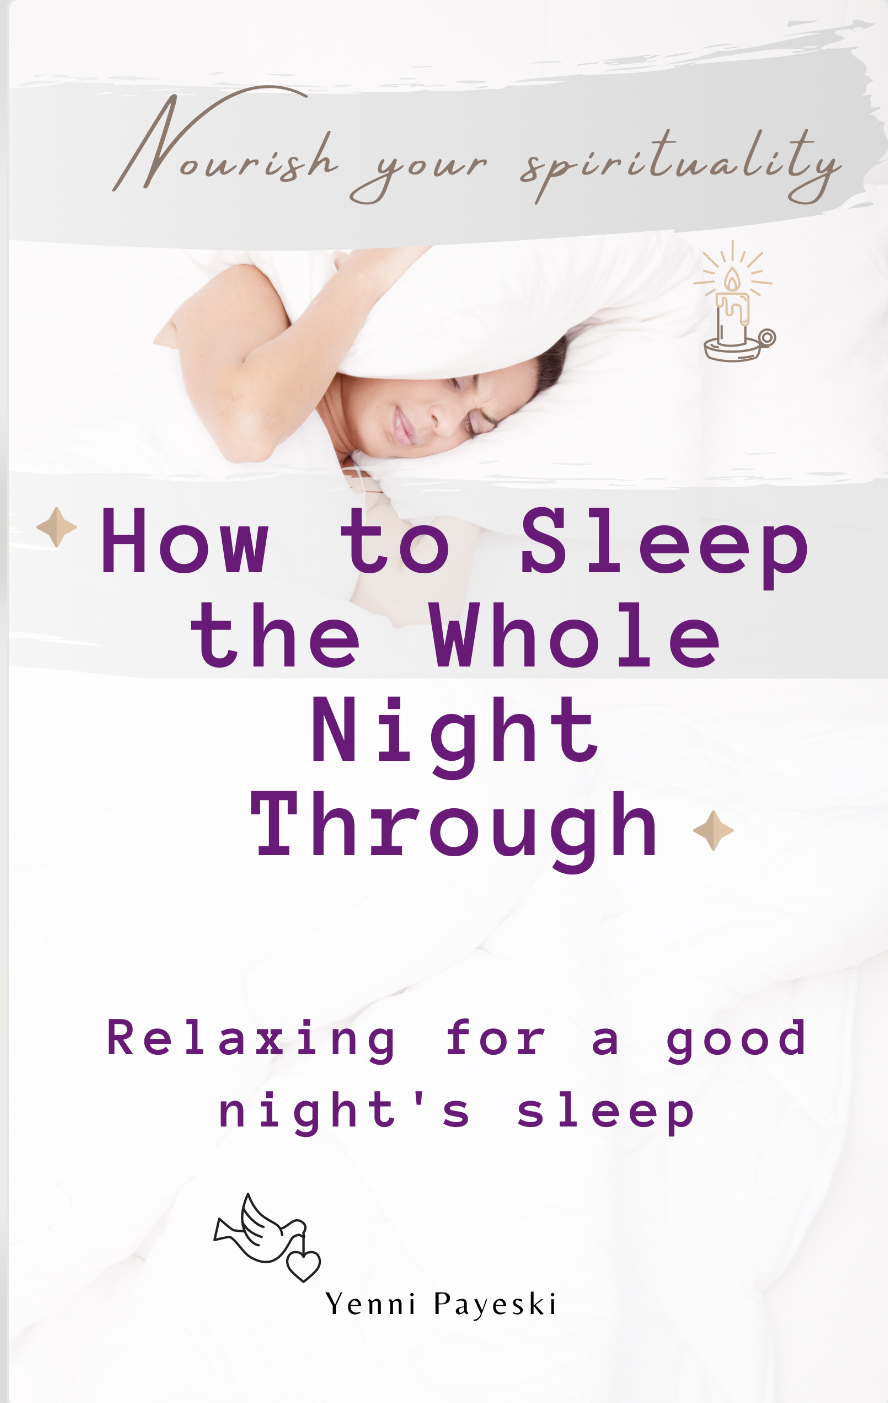 How to Sleep the Whole Night Through. Relaxing for a good night’s sleep. Nourish your spirituality